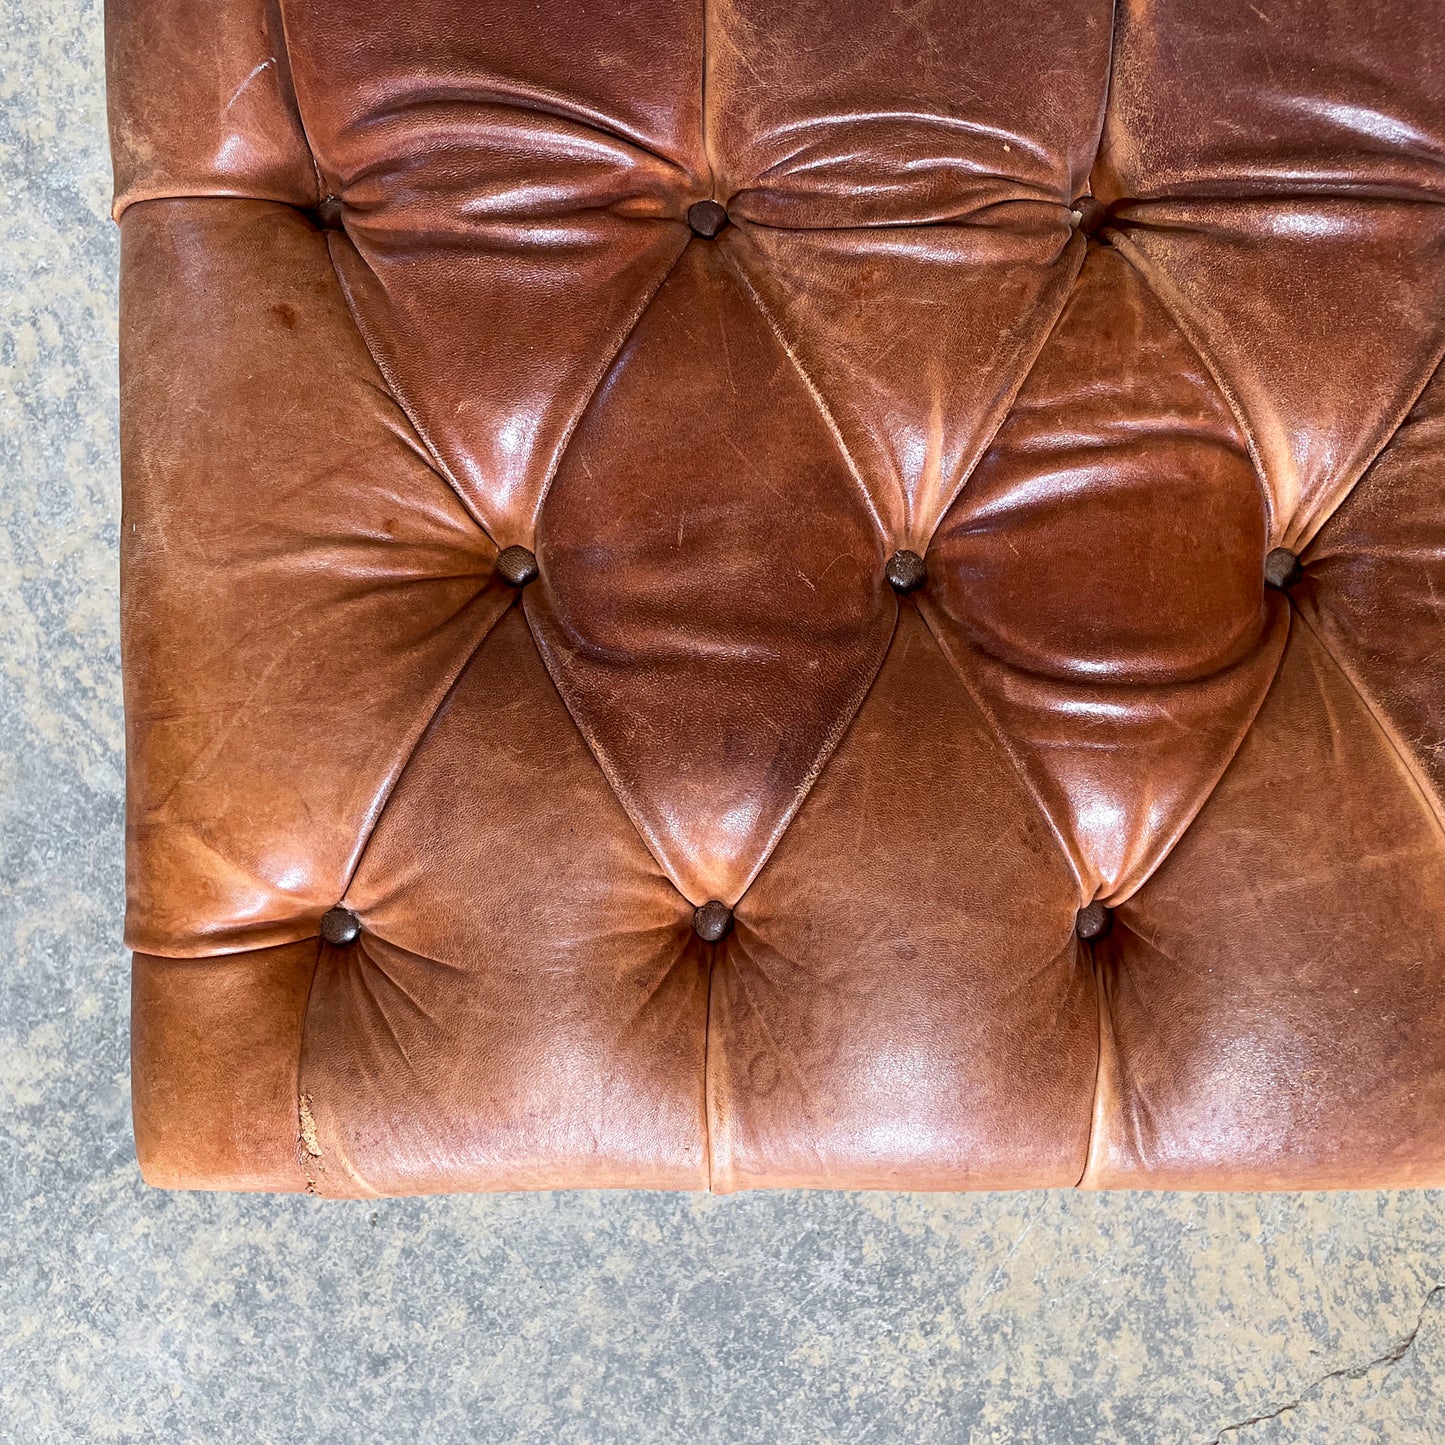 Leather Tufted Coffee Table